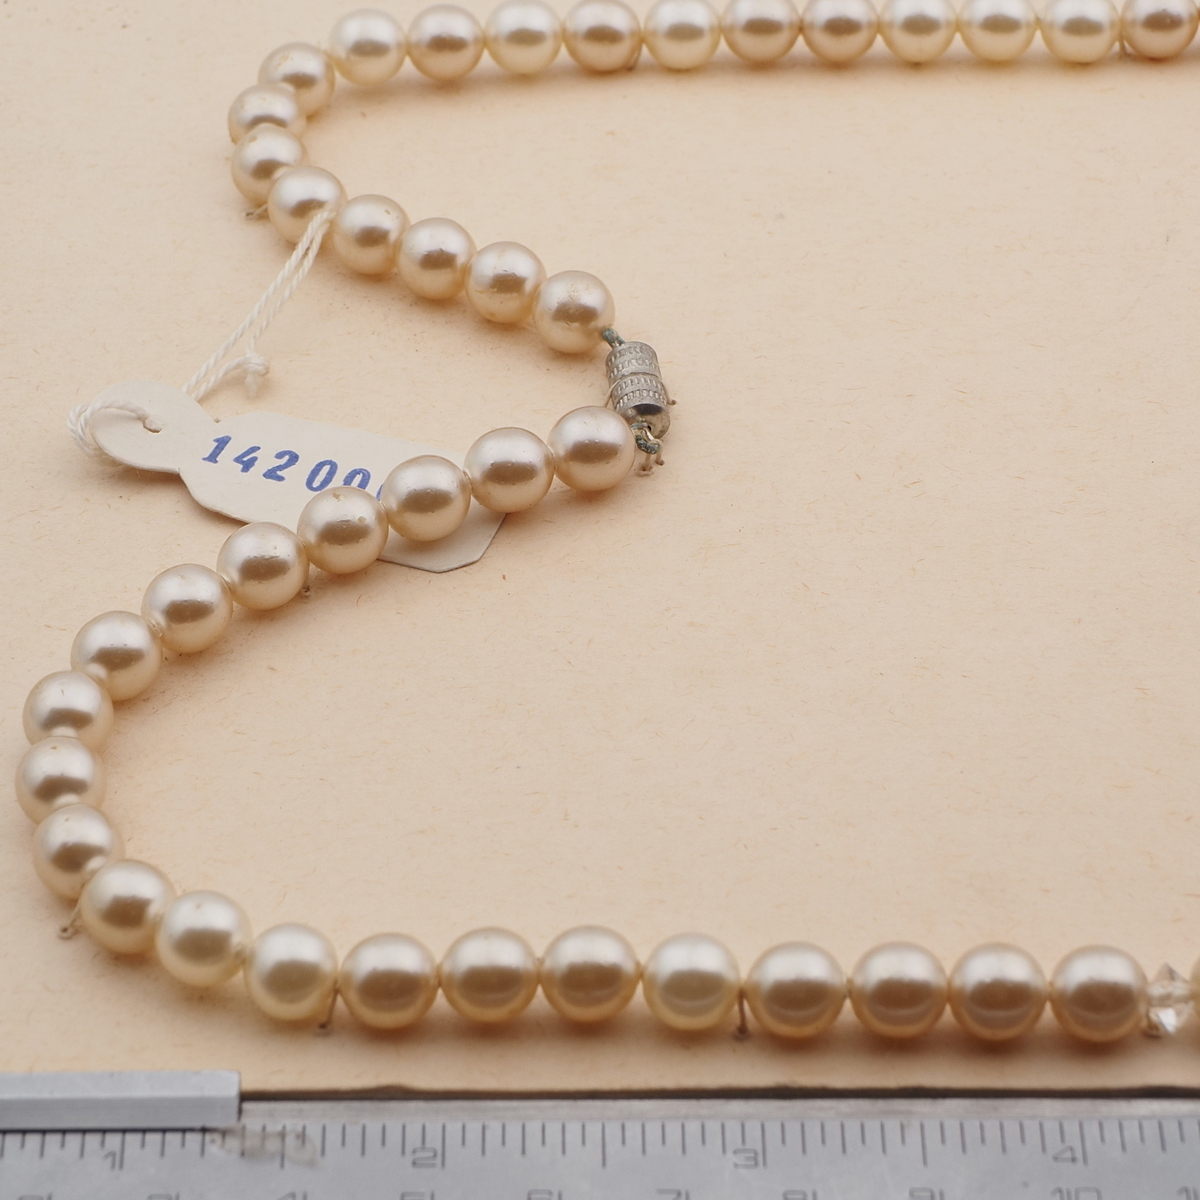 Vintage Czech necklace pearl clear glass beads 24"